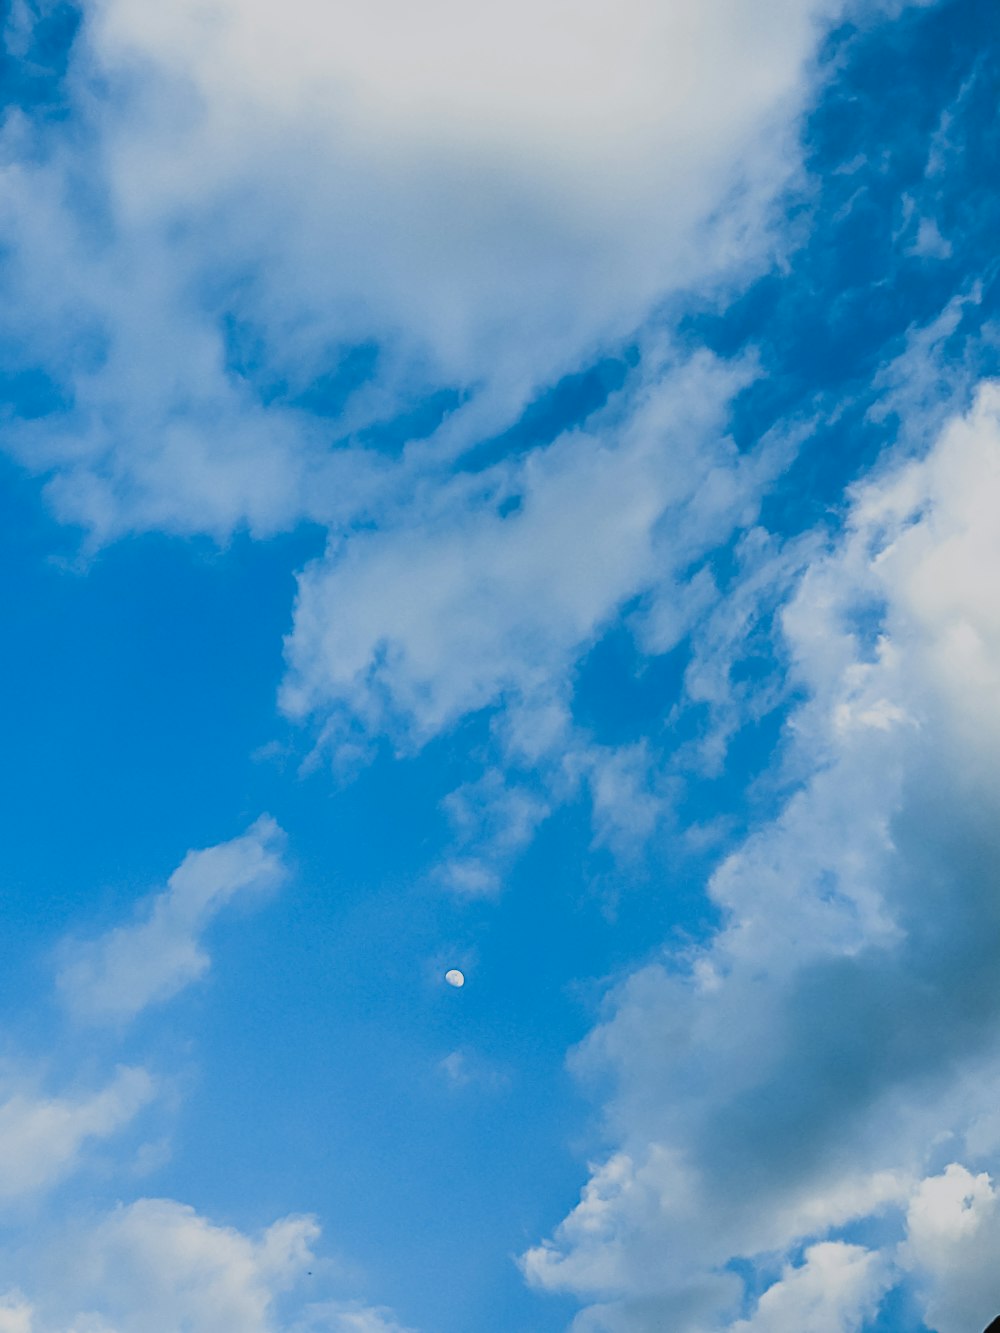 a blue sky with clouds and a half moon